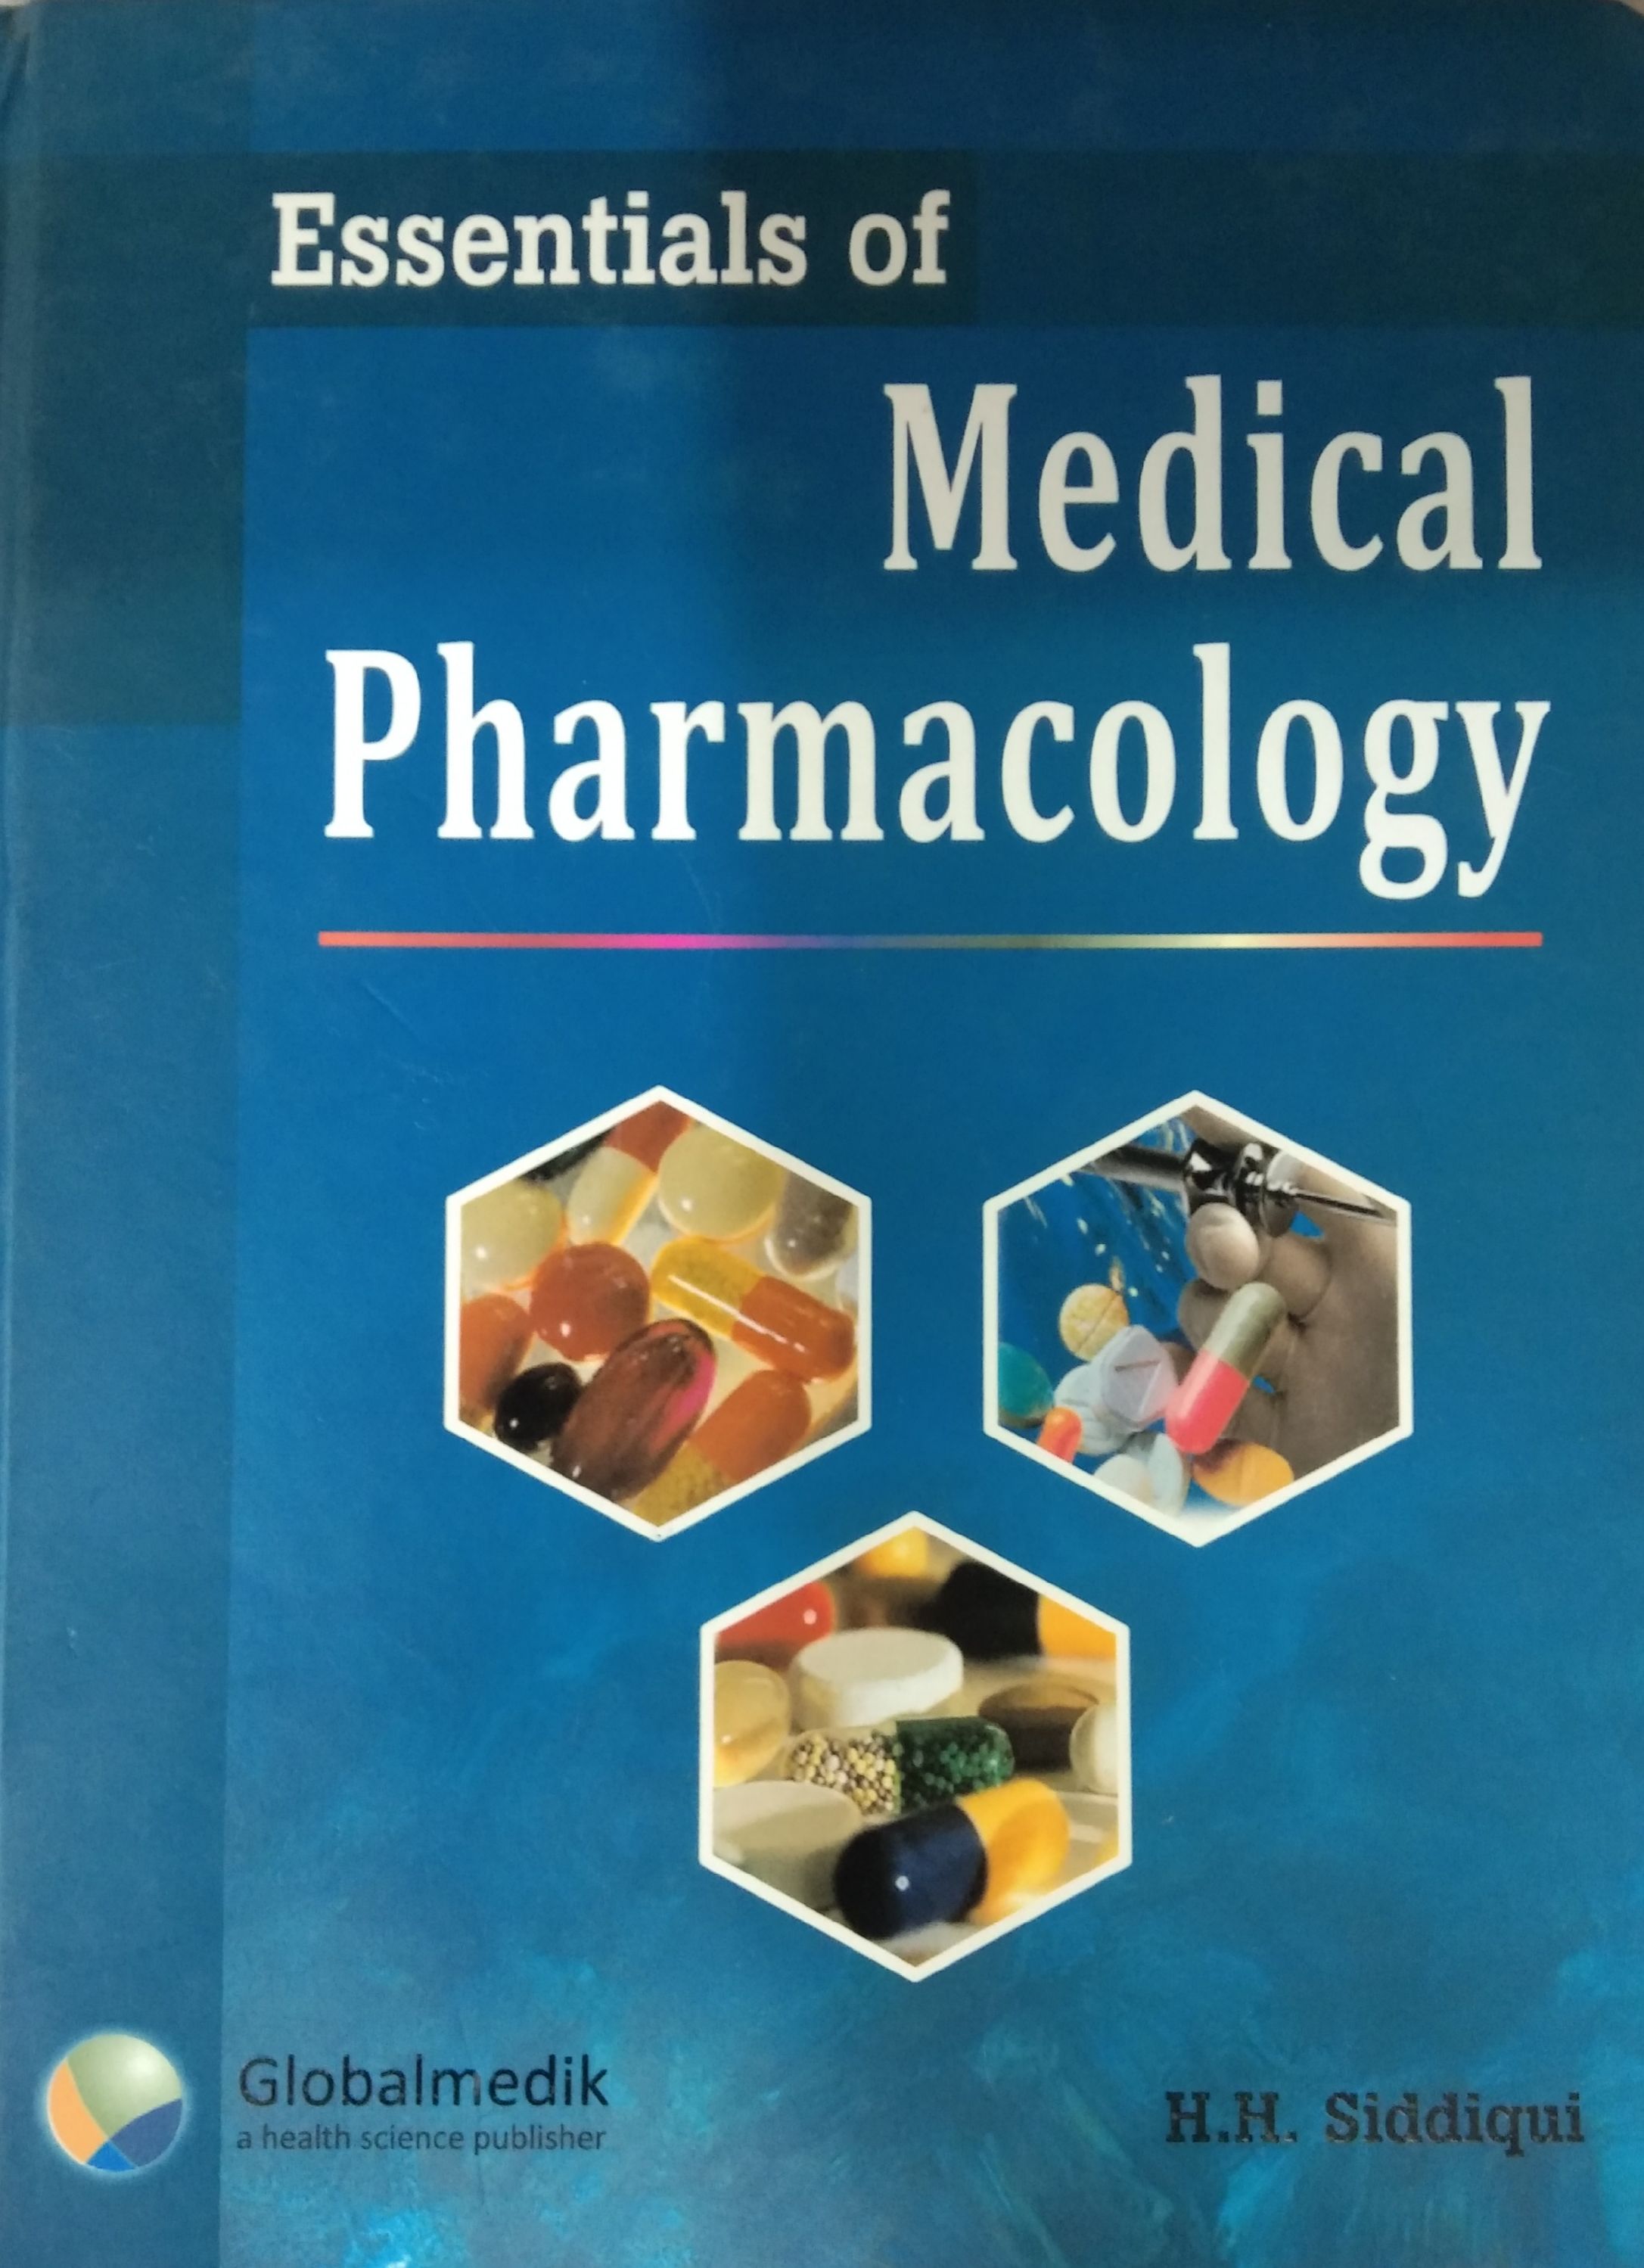 
essential-of-medical-pharmacology-9788190401173